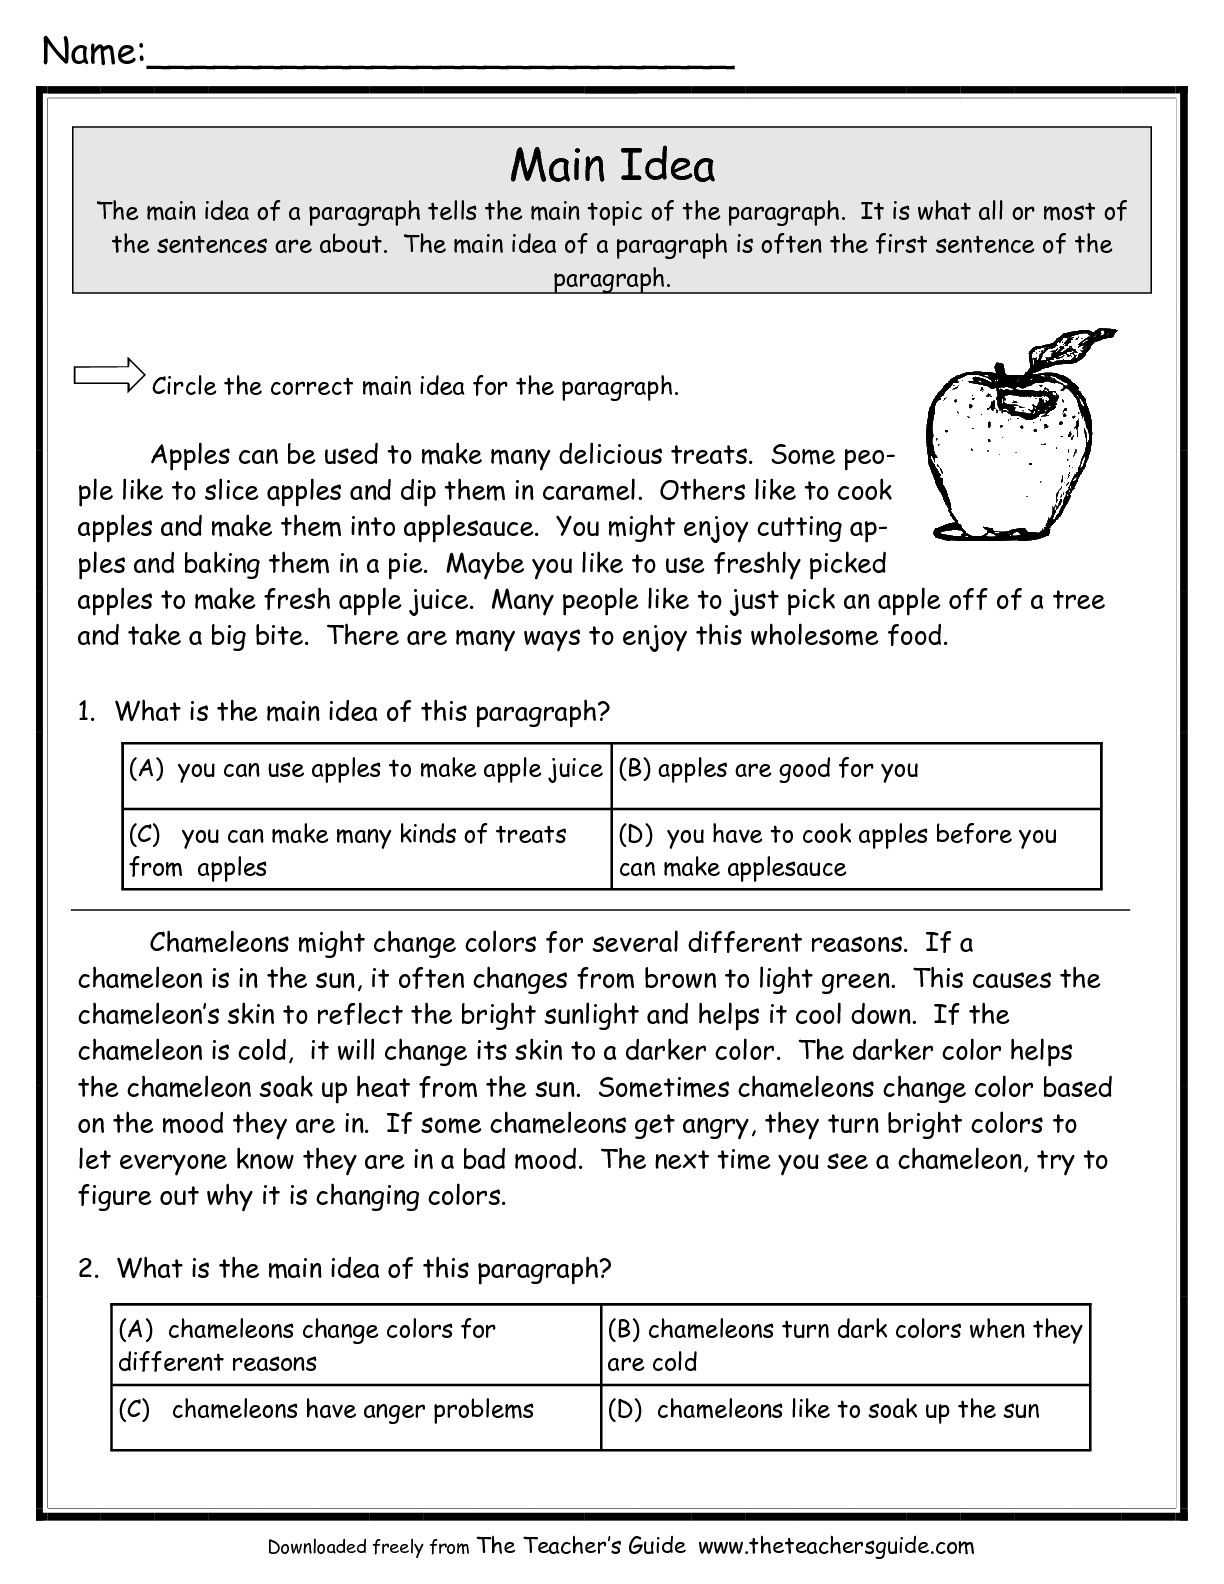 Reading Comprehension Main Idea Worksheets Along with Implied Main Idea Worksheet Gallery Worksheet for Kids In English